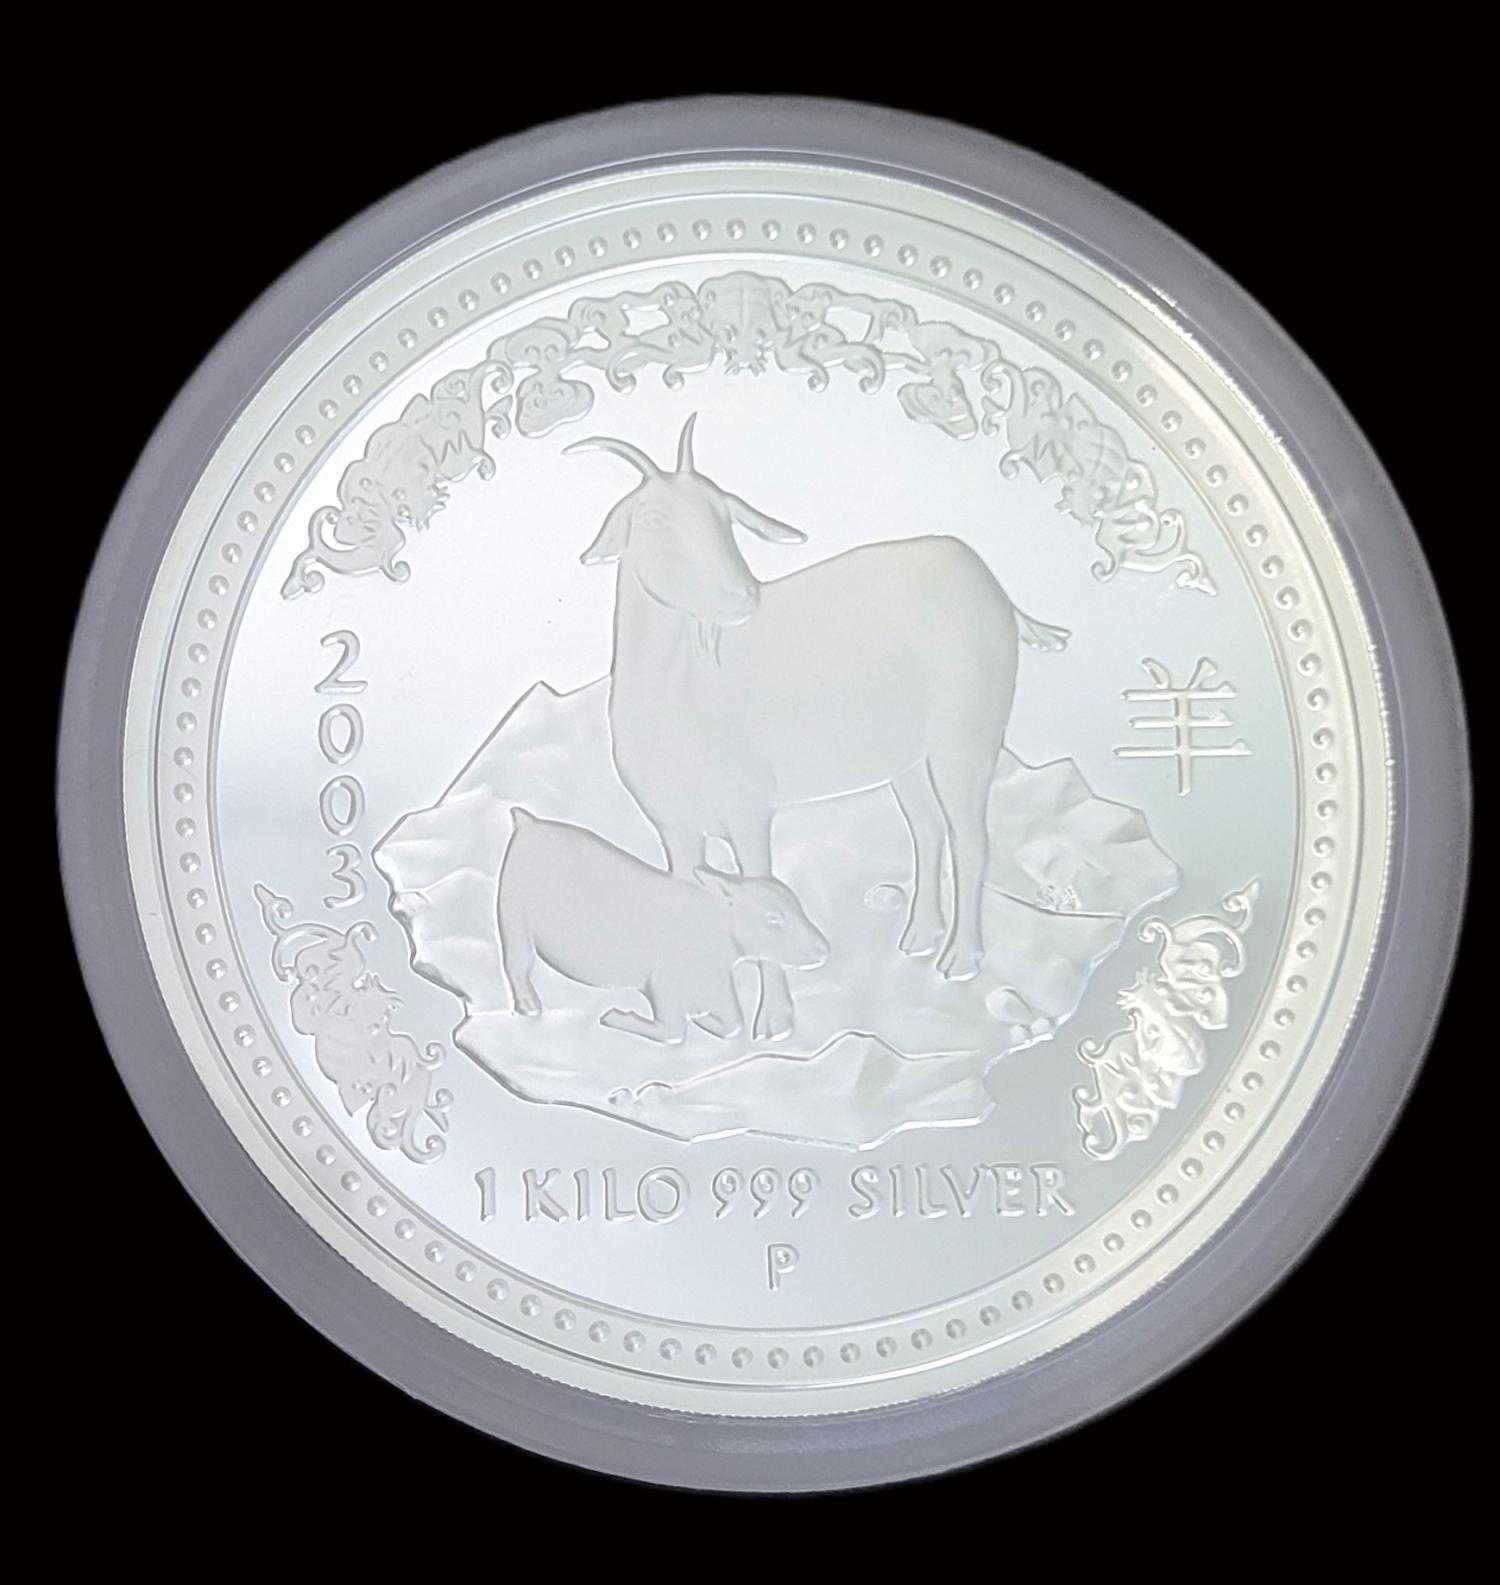 Thumbnail for 2003 Year Of The Goat 1 KILO Silver Proof Coin in Capsule